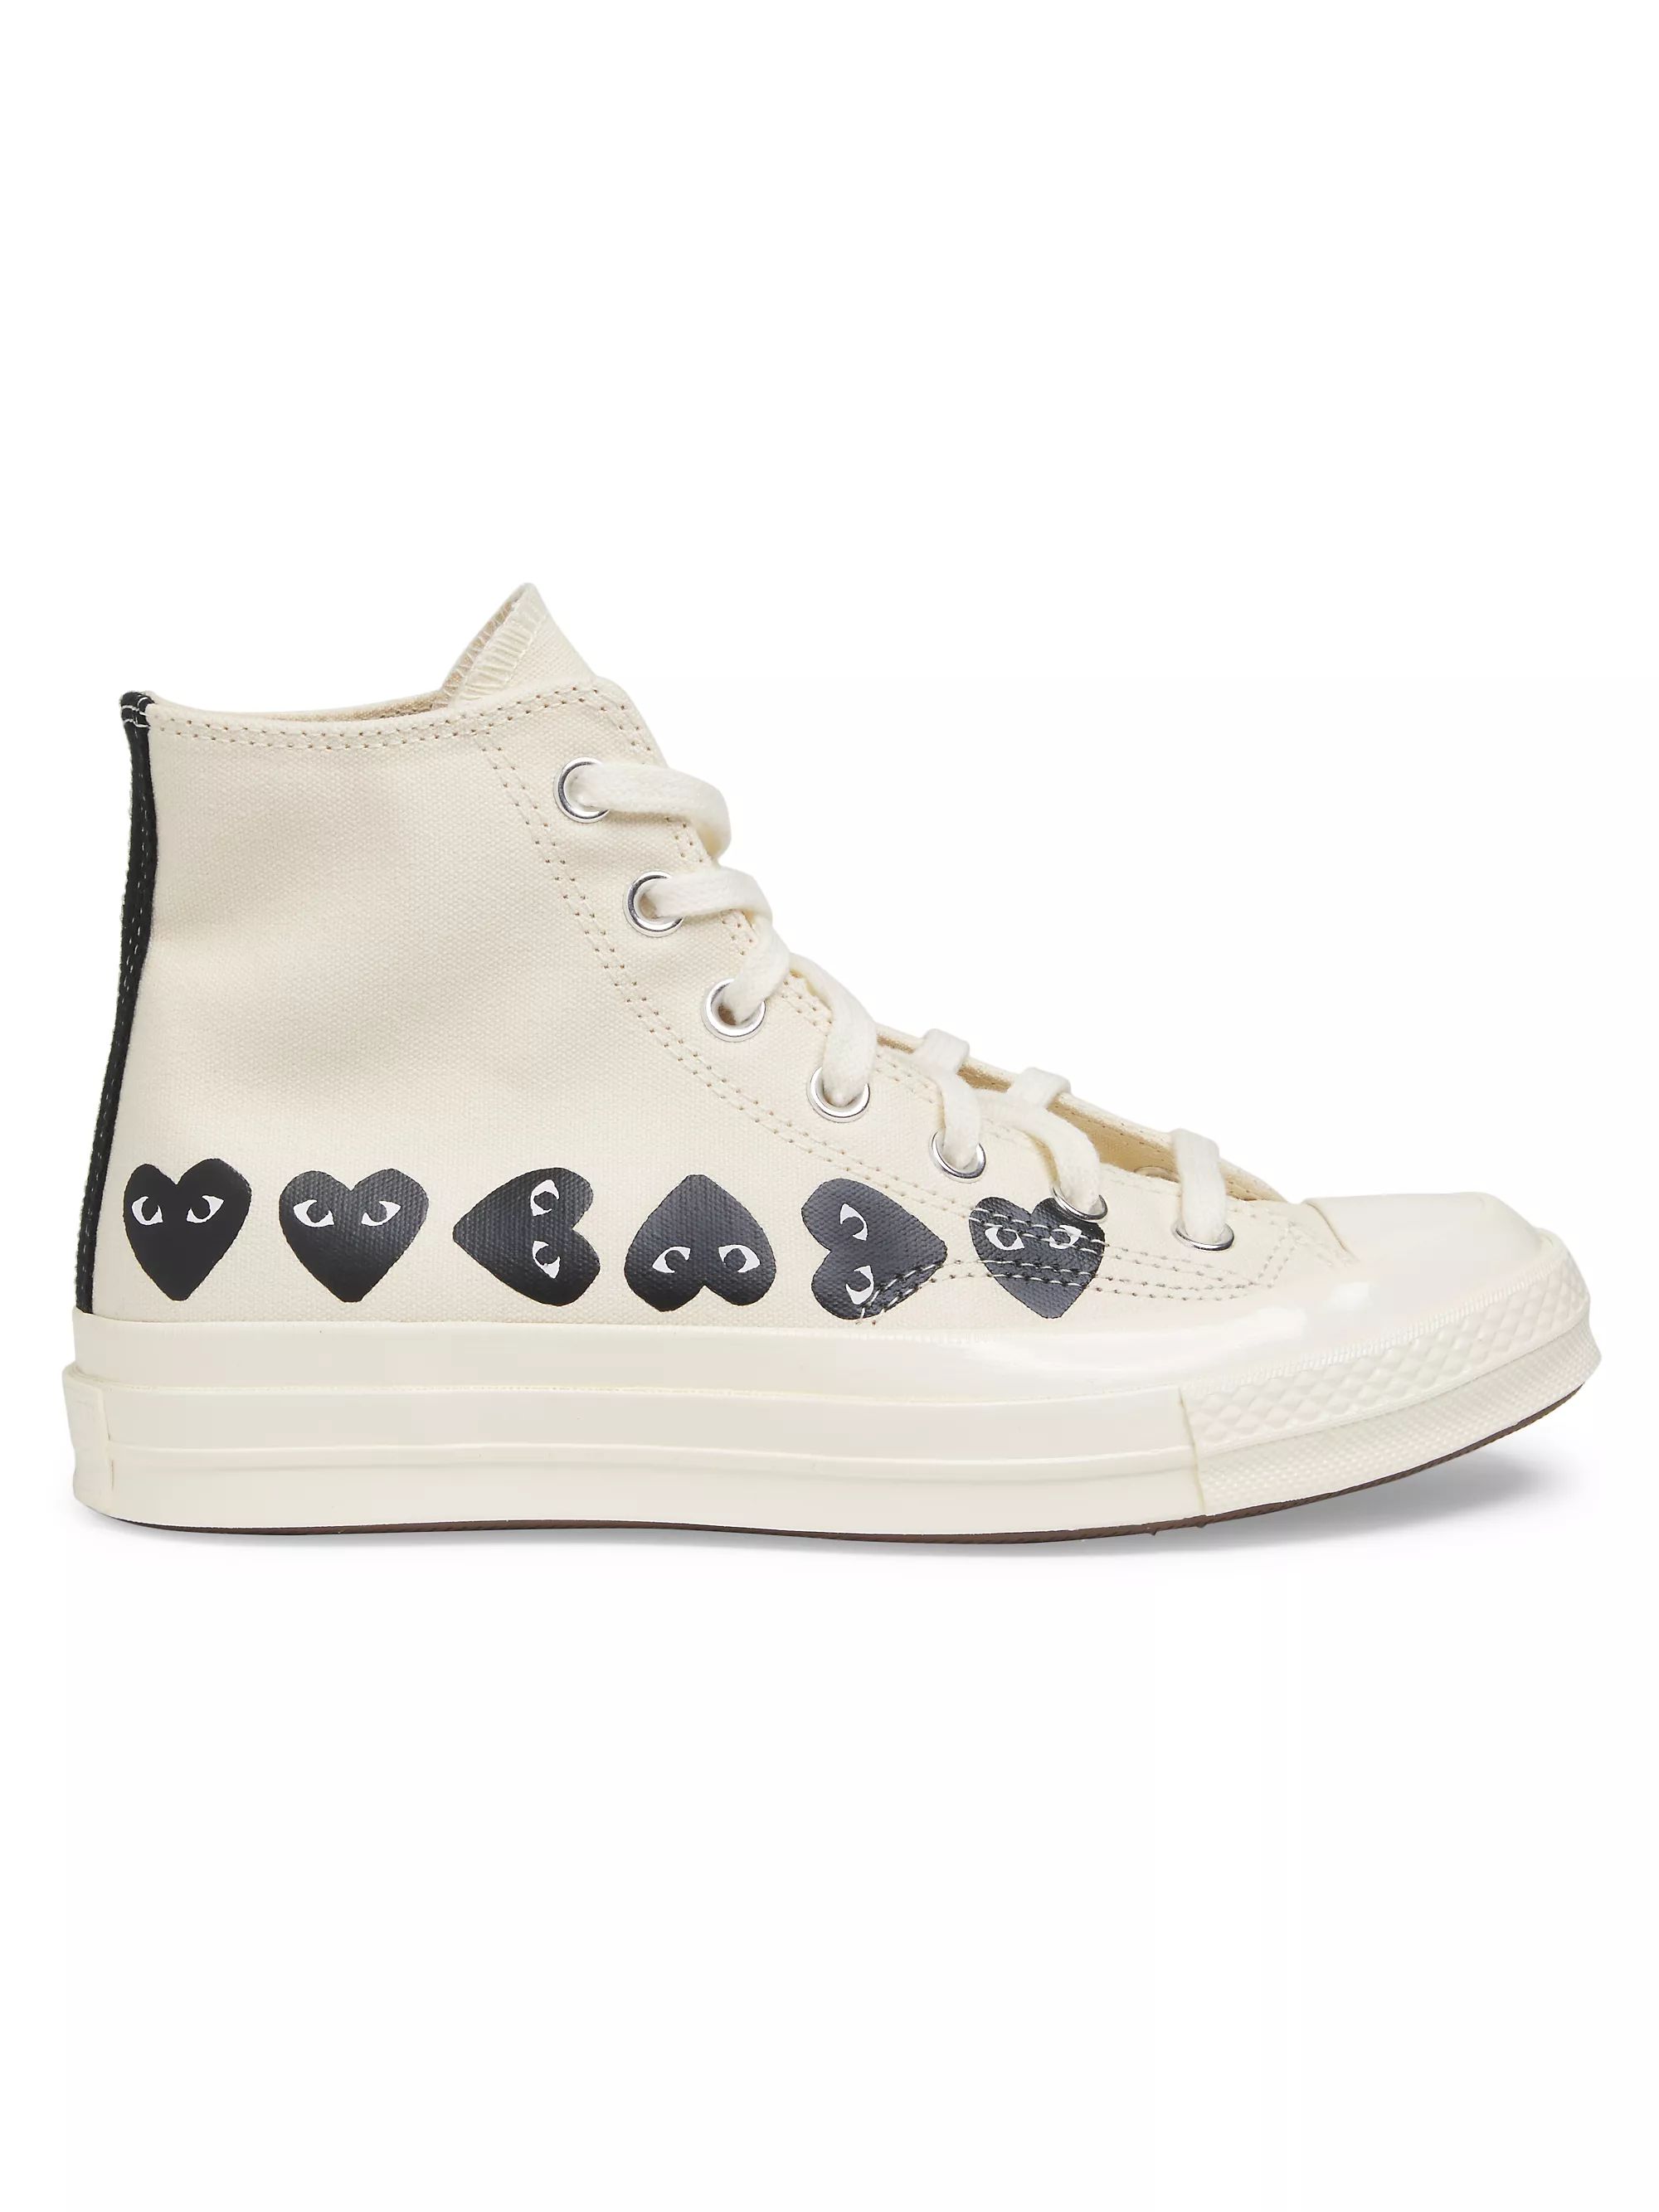 CdG PLAY x Converse Chuck Taylor All Star Heart High-Top Sneakers | Saks Fifth Avenue